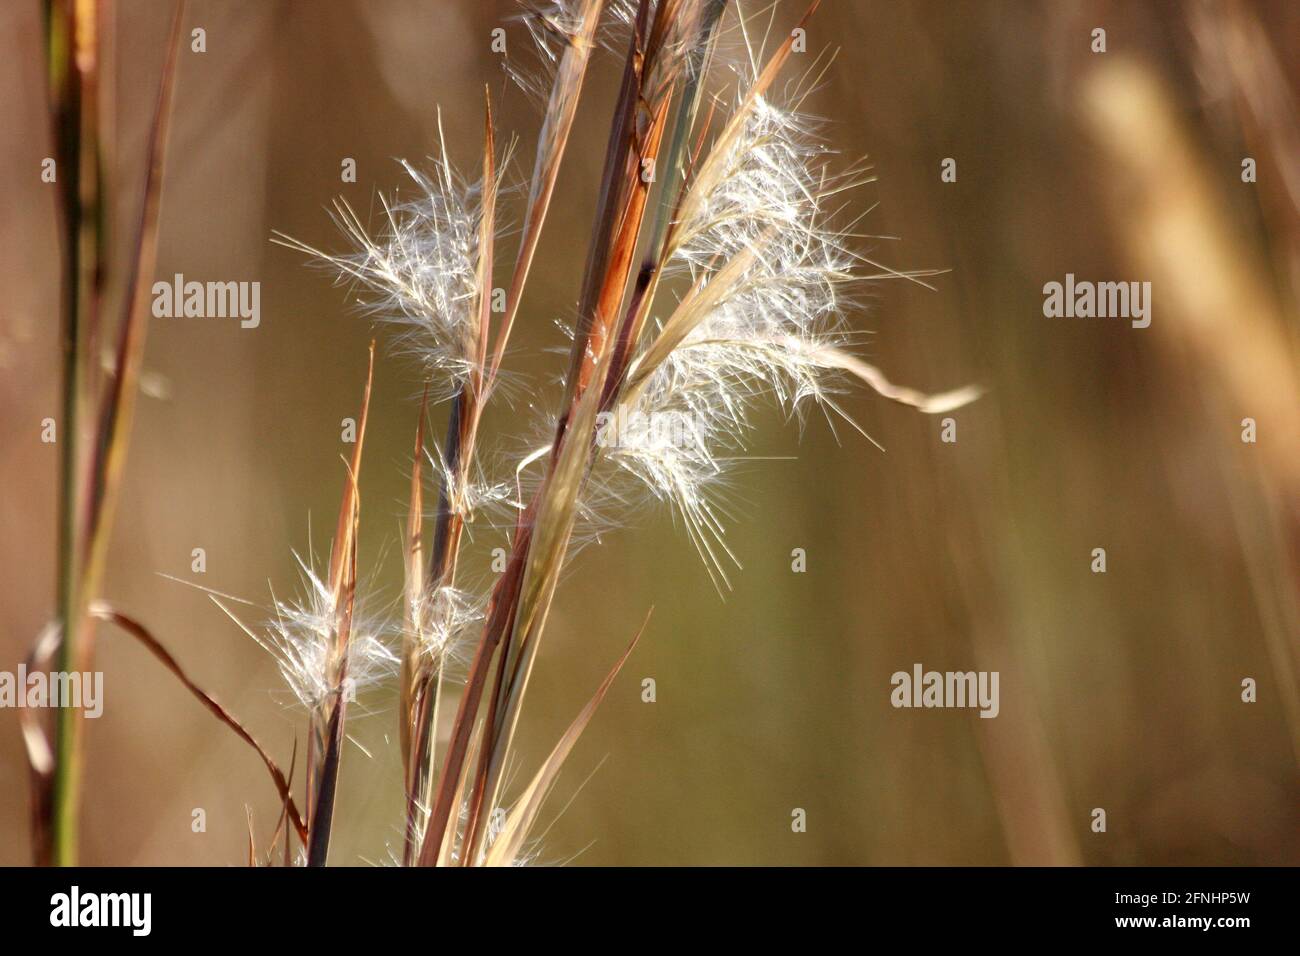 Little bluestem (beard grass) in autumn. Close-up of the fuzzy seed heads. Stock Photo